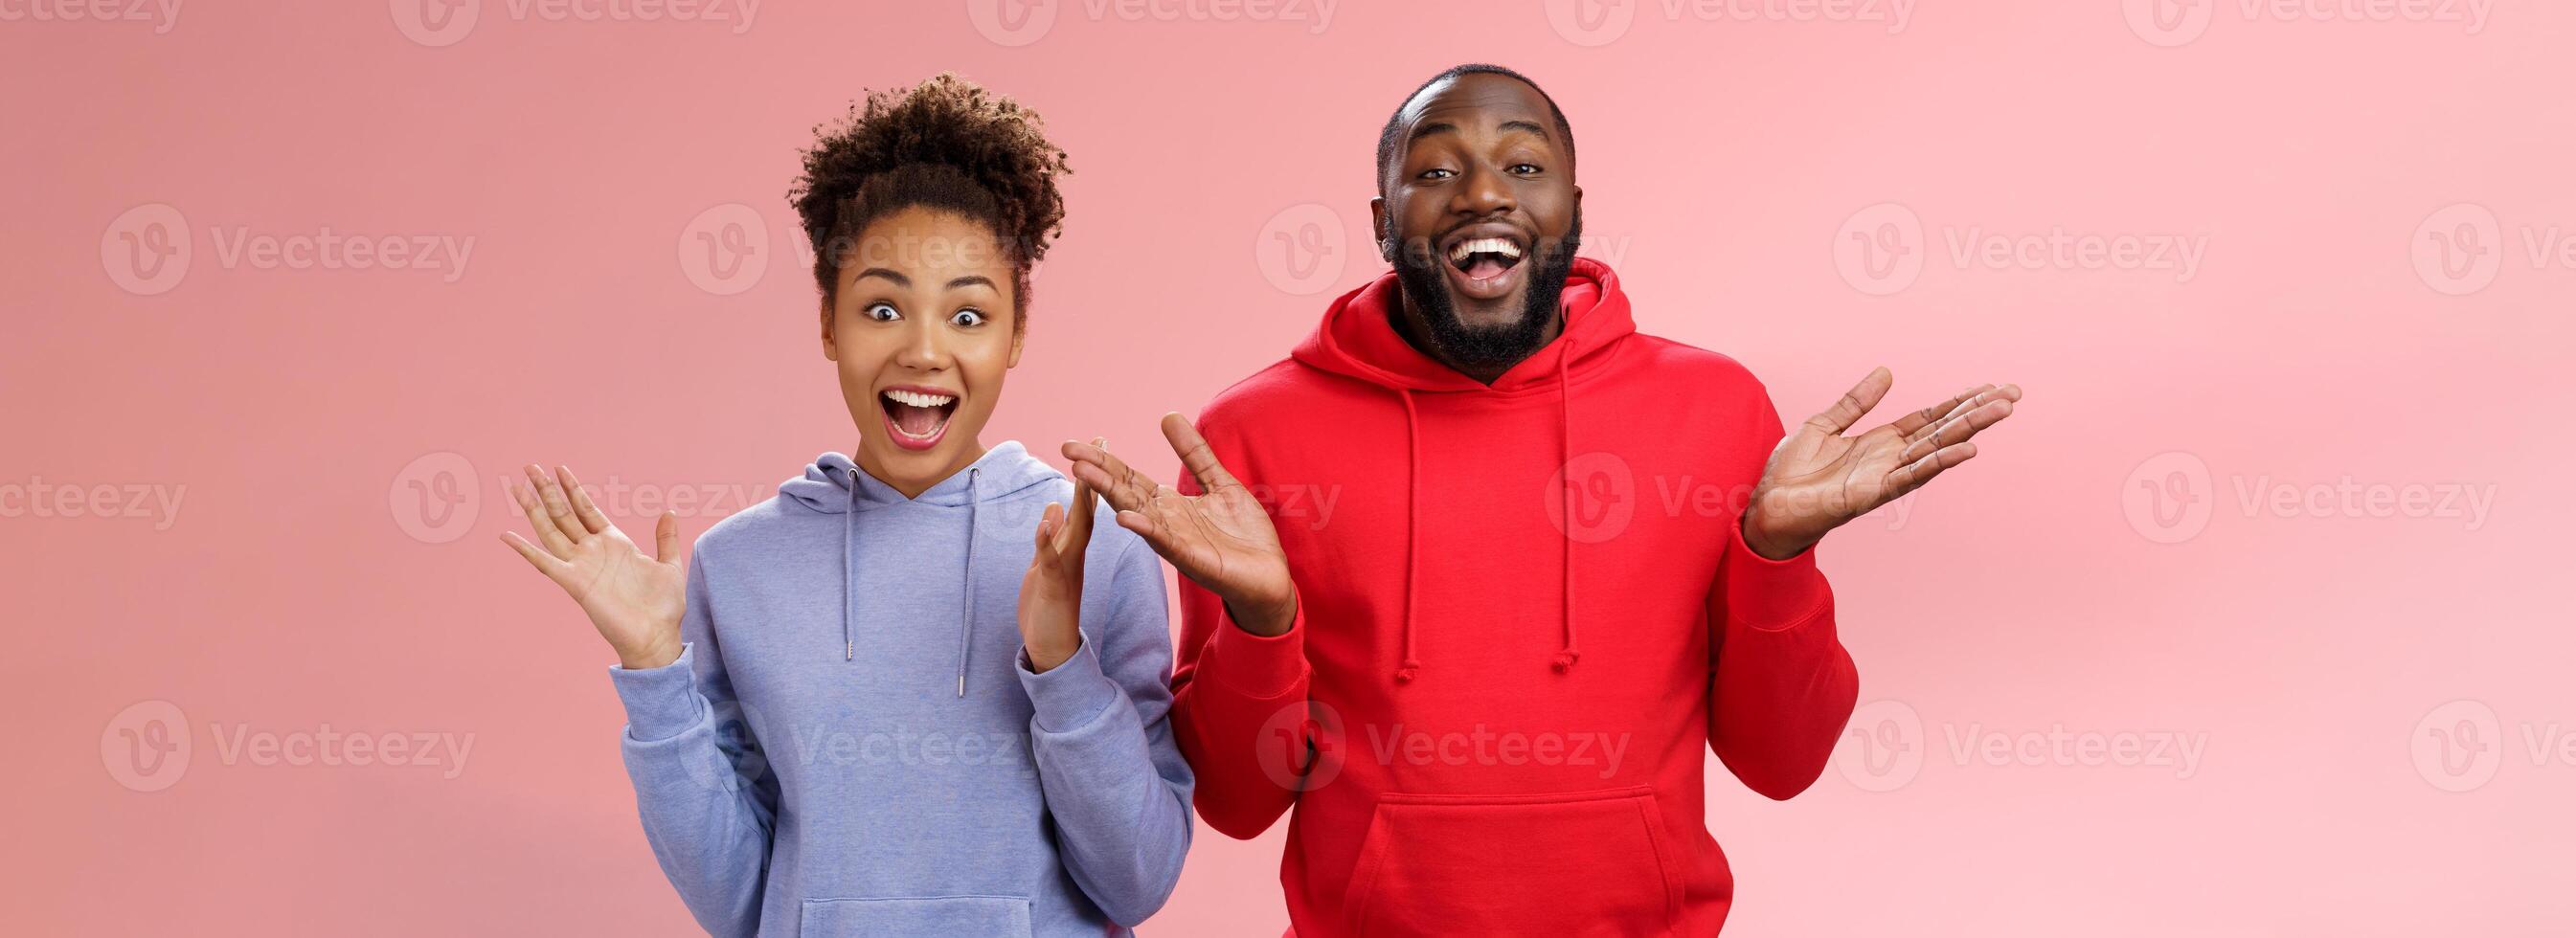 Guys receive nice surprise. Two attractive carefree surprised happy african man woman clapping hands joyfully greeting welcoming guests inviting people joing party standing friendly pink background photo